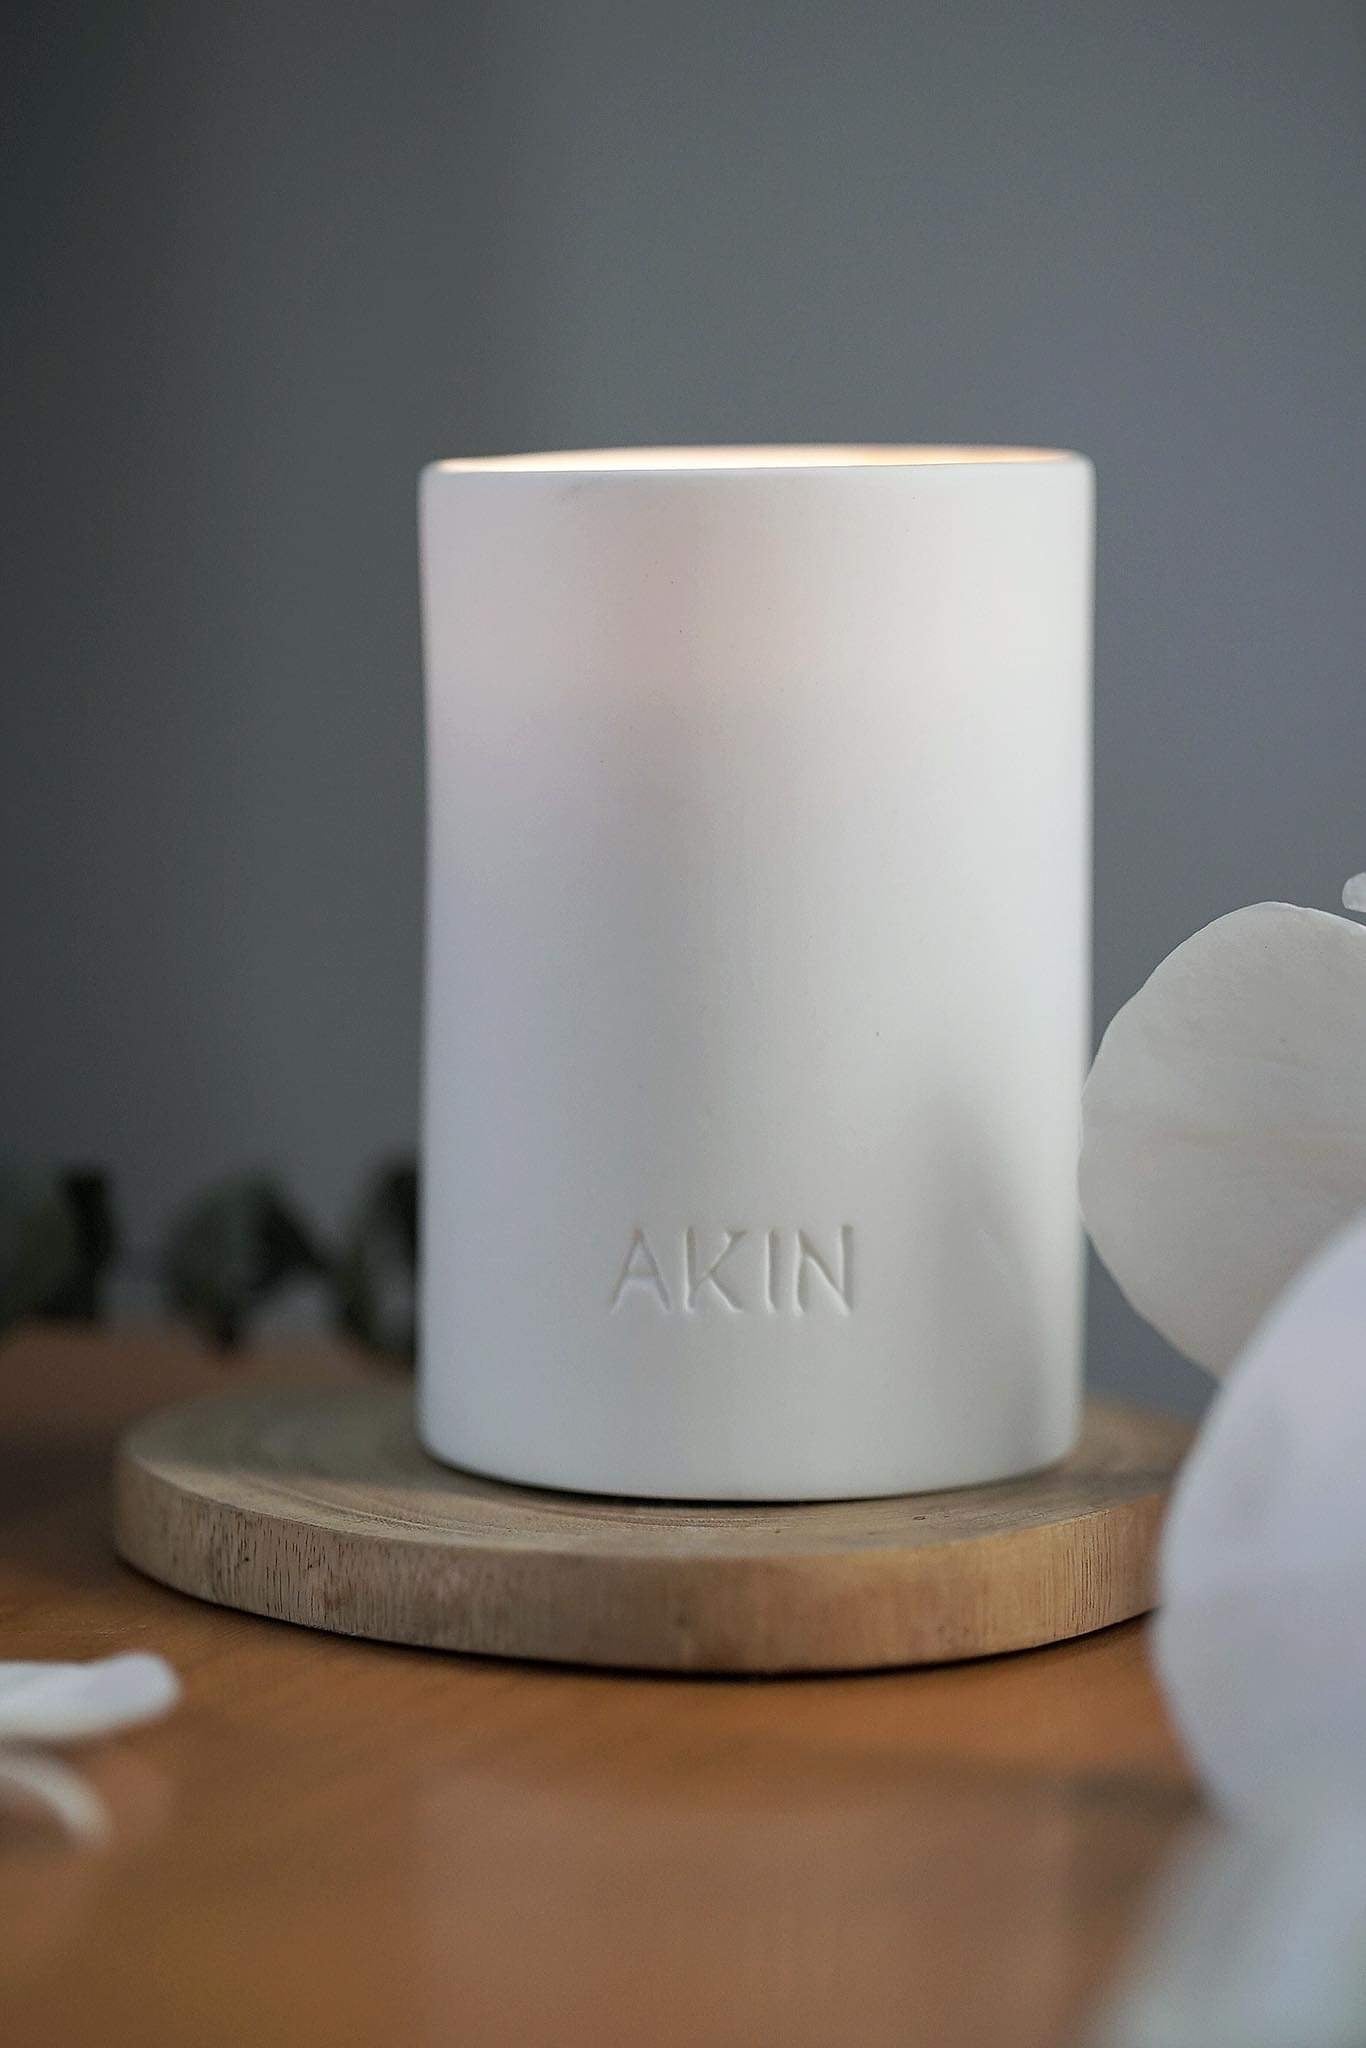 LIMITED HOLIDAY CANDLE by Akin